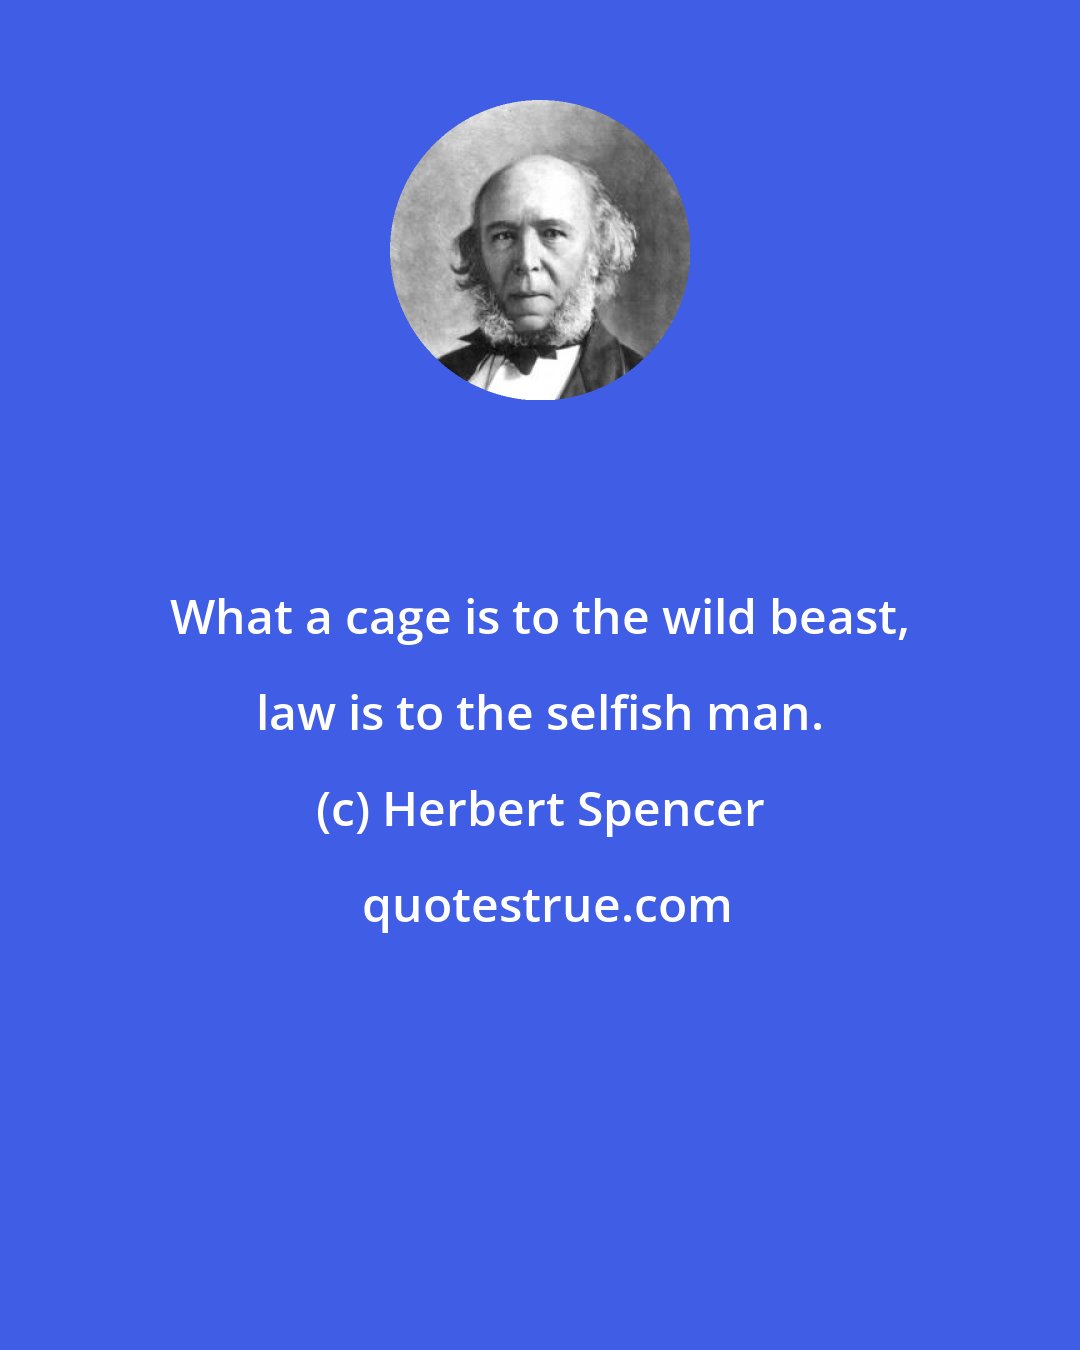 Herbert Spencer: What a cage is to the wild beast, law is to the selfish man.